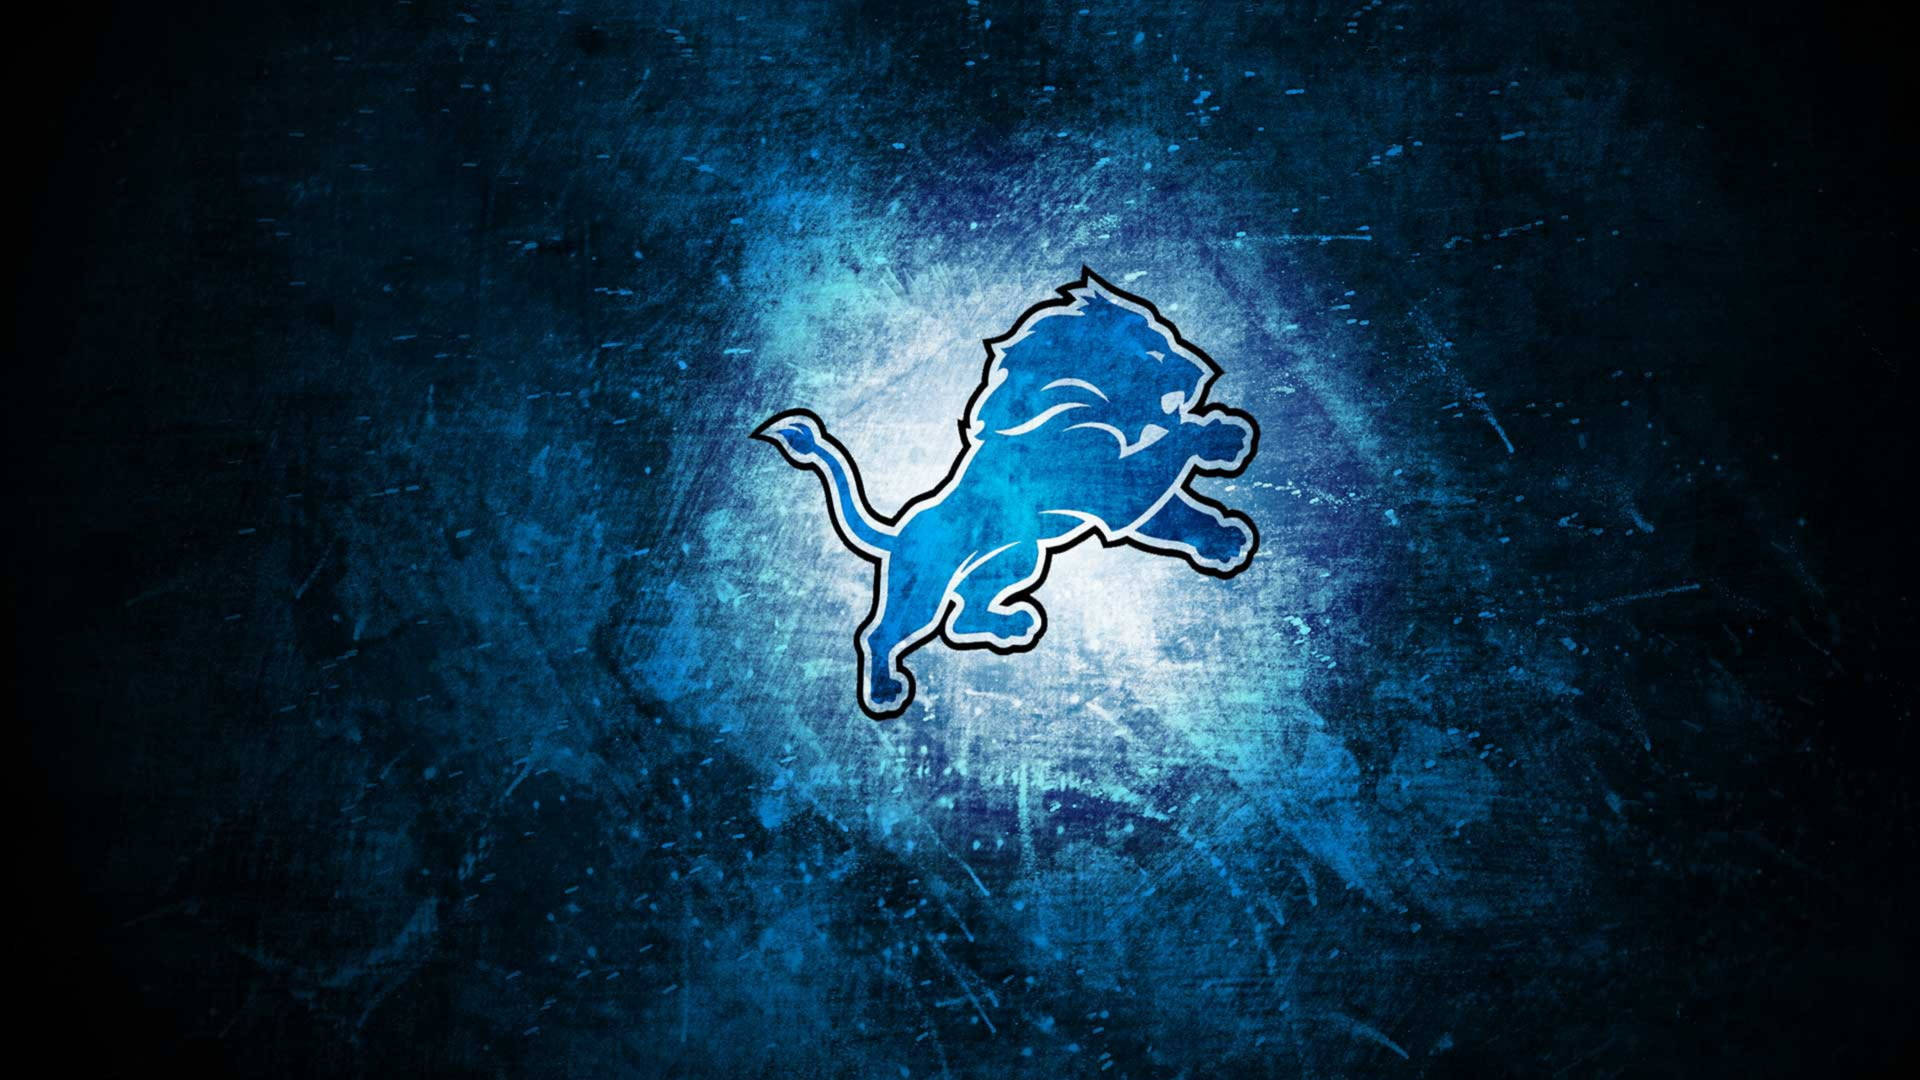 Determination And Power - A Detroit Lion In Action Background